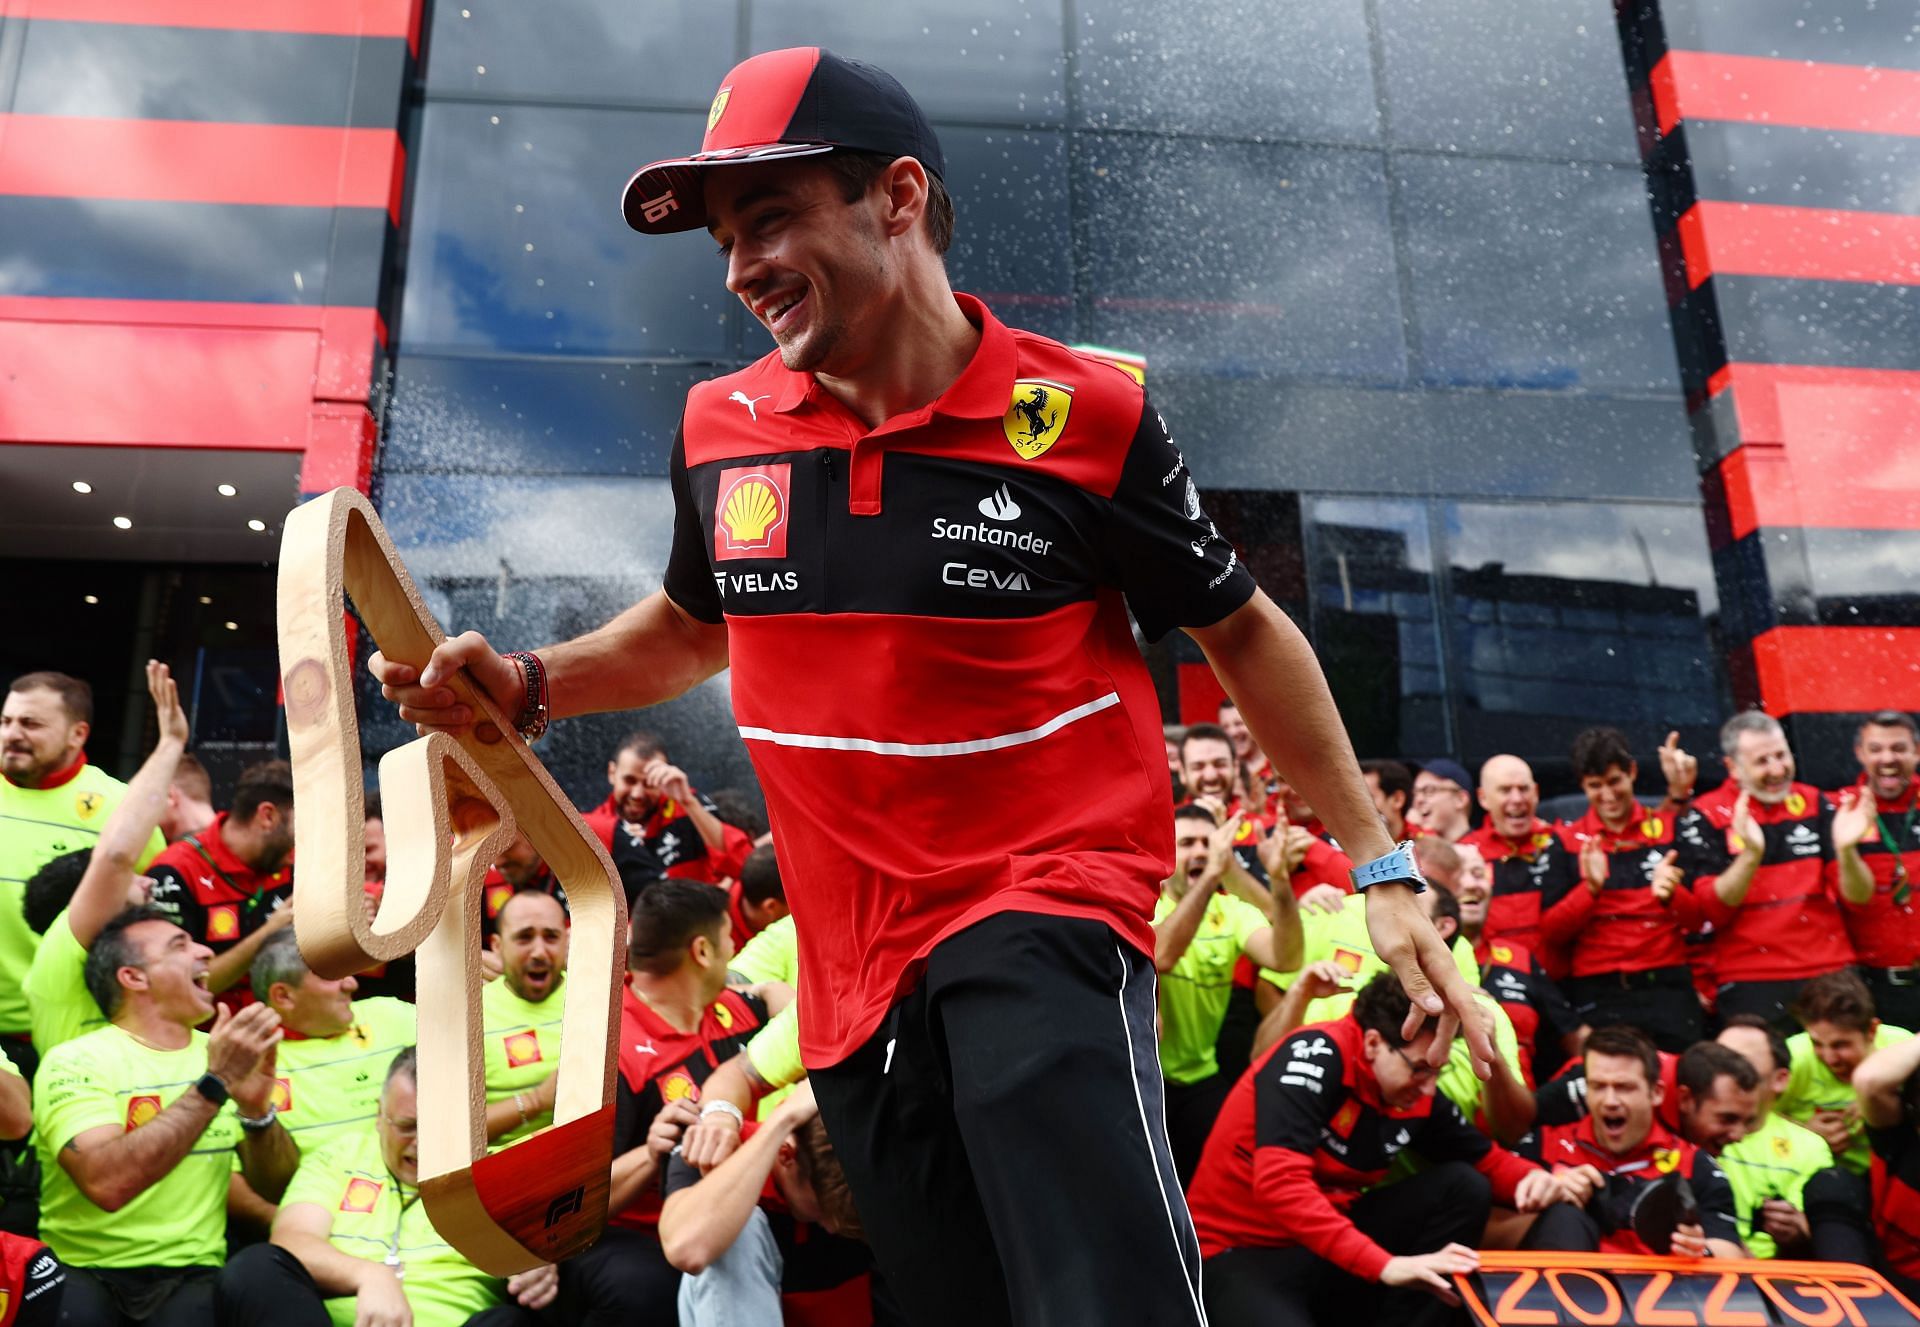 Race winner Charles Leclerc celebrates with his team after the F1 Grand Prix of Austria at Red Bull Ring on July 10, 2022, in Spielberg, Austria (Photo by Clive Rose/Getty Images)